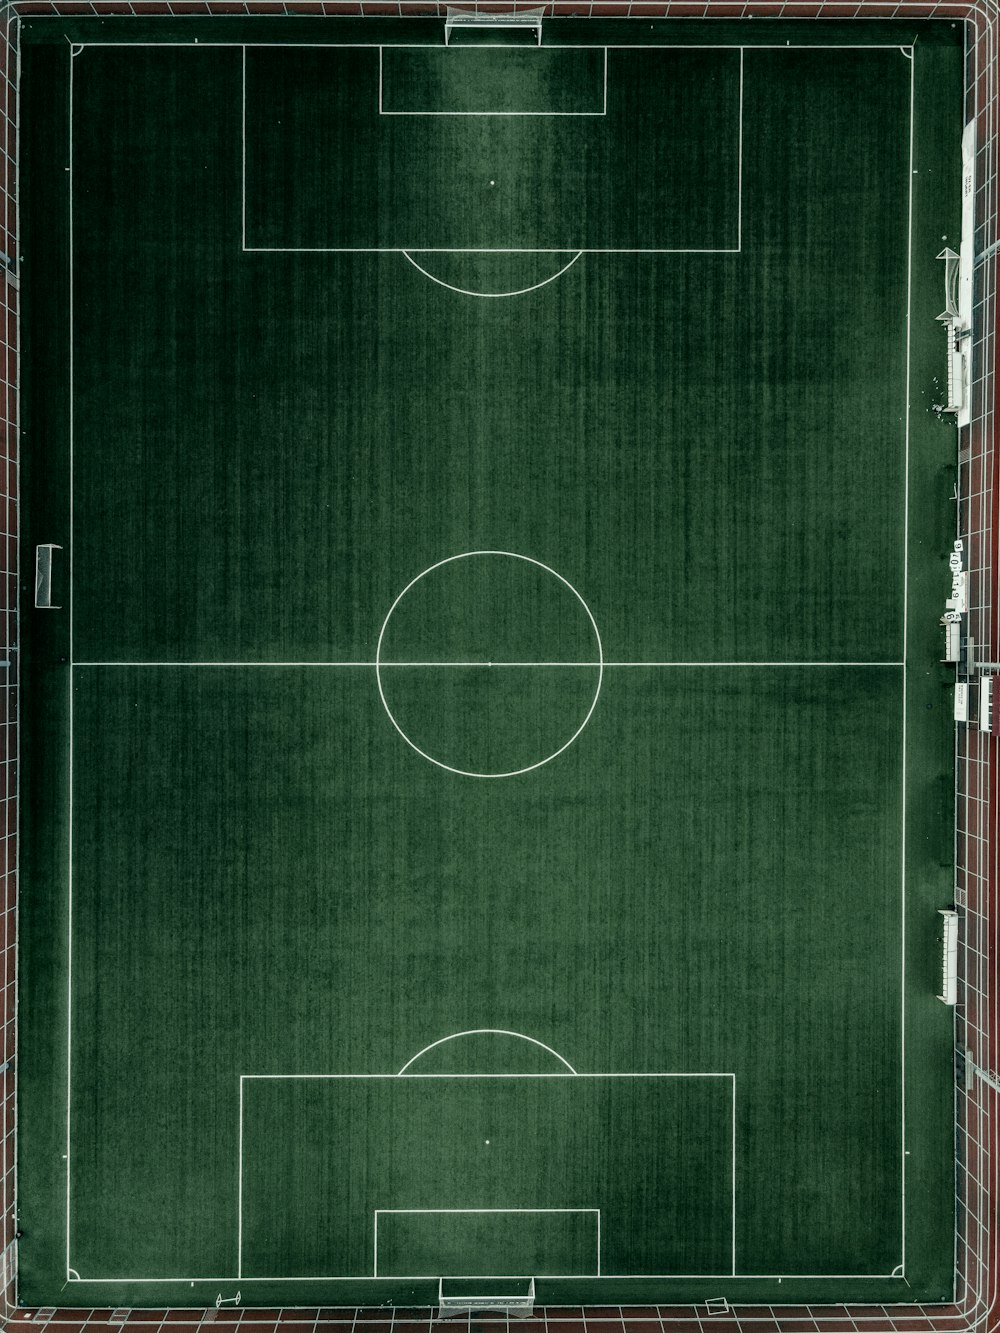 aerial view of soccer field